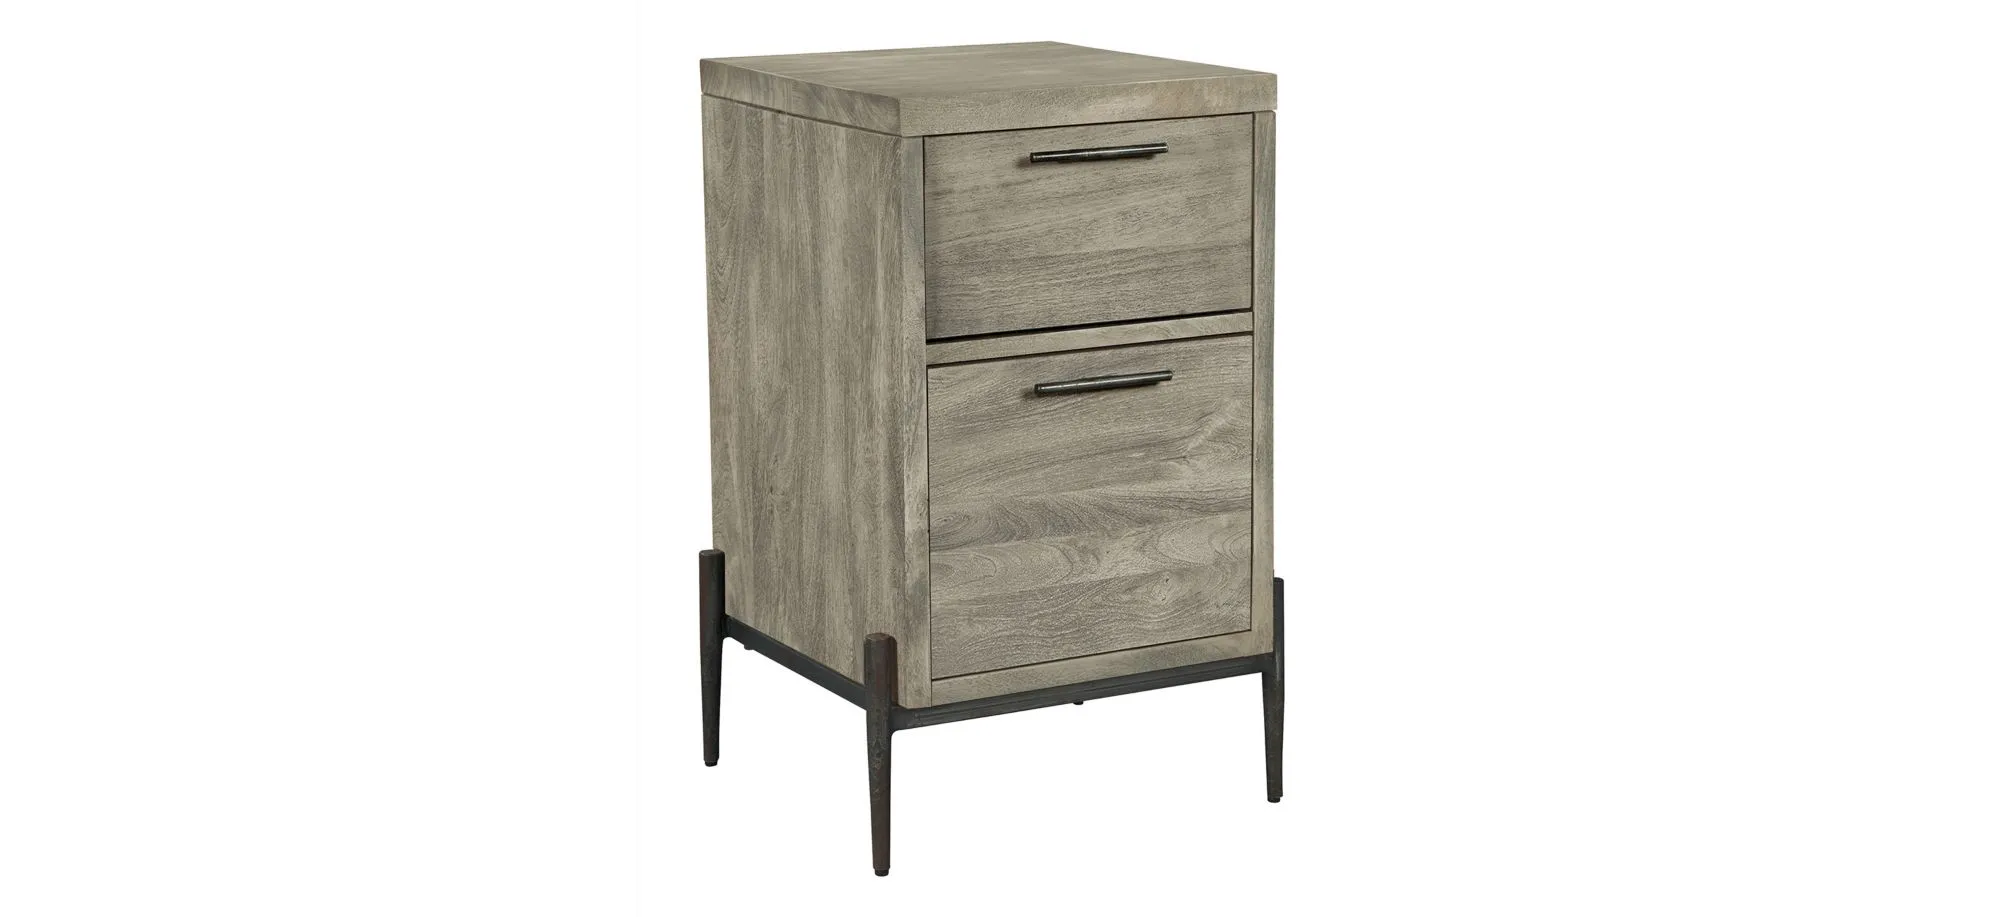 Bedford Park File Cabinet in BEDFORD GRAY by Hekman Furniture Company